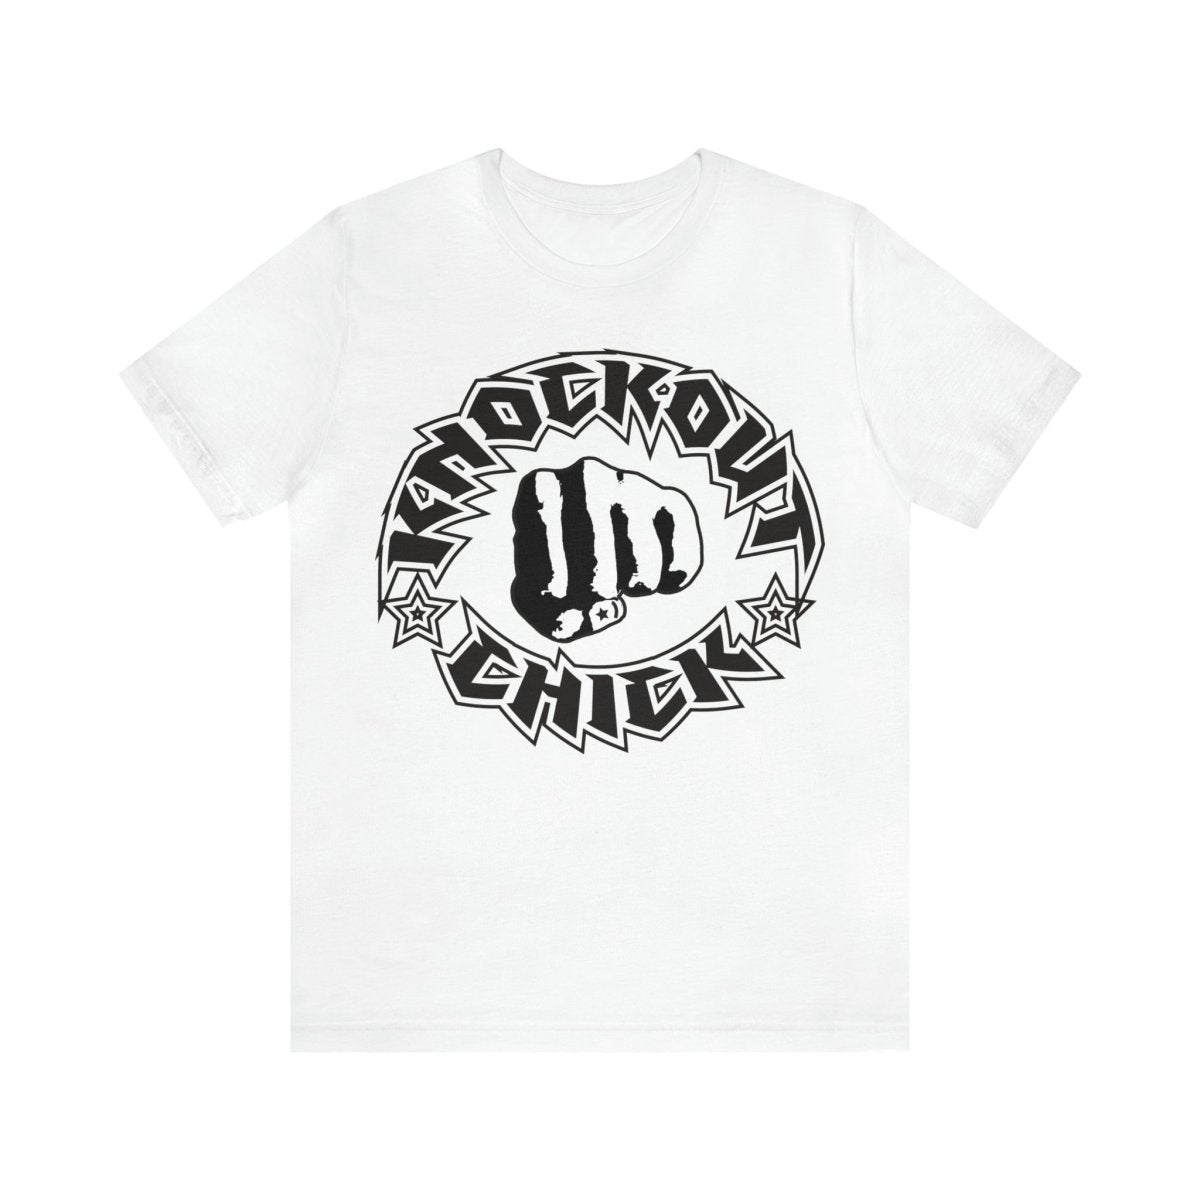 Knockout Chick Premium T-Shirt, Gym, Kickboxing, Training, Workout, Tough, Fitness Gift for Her